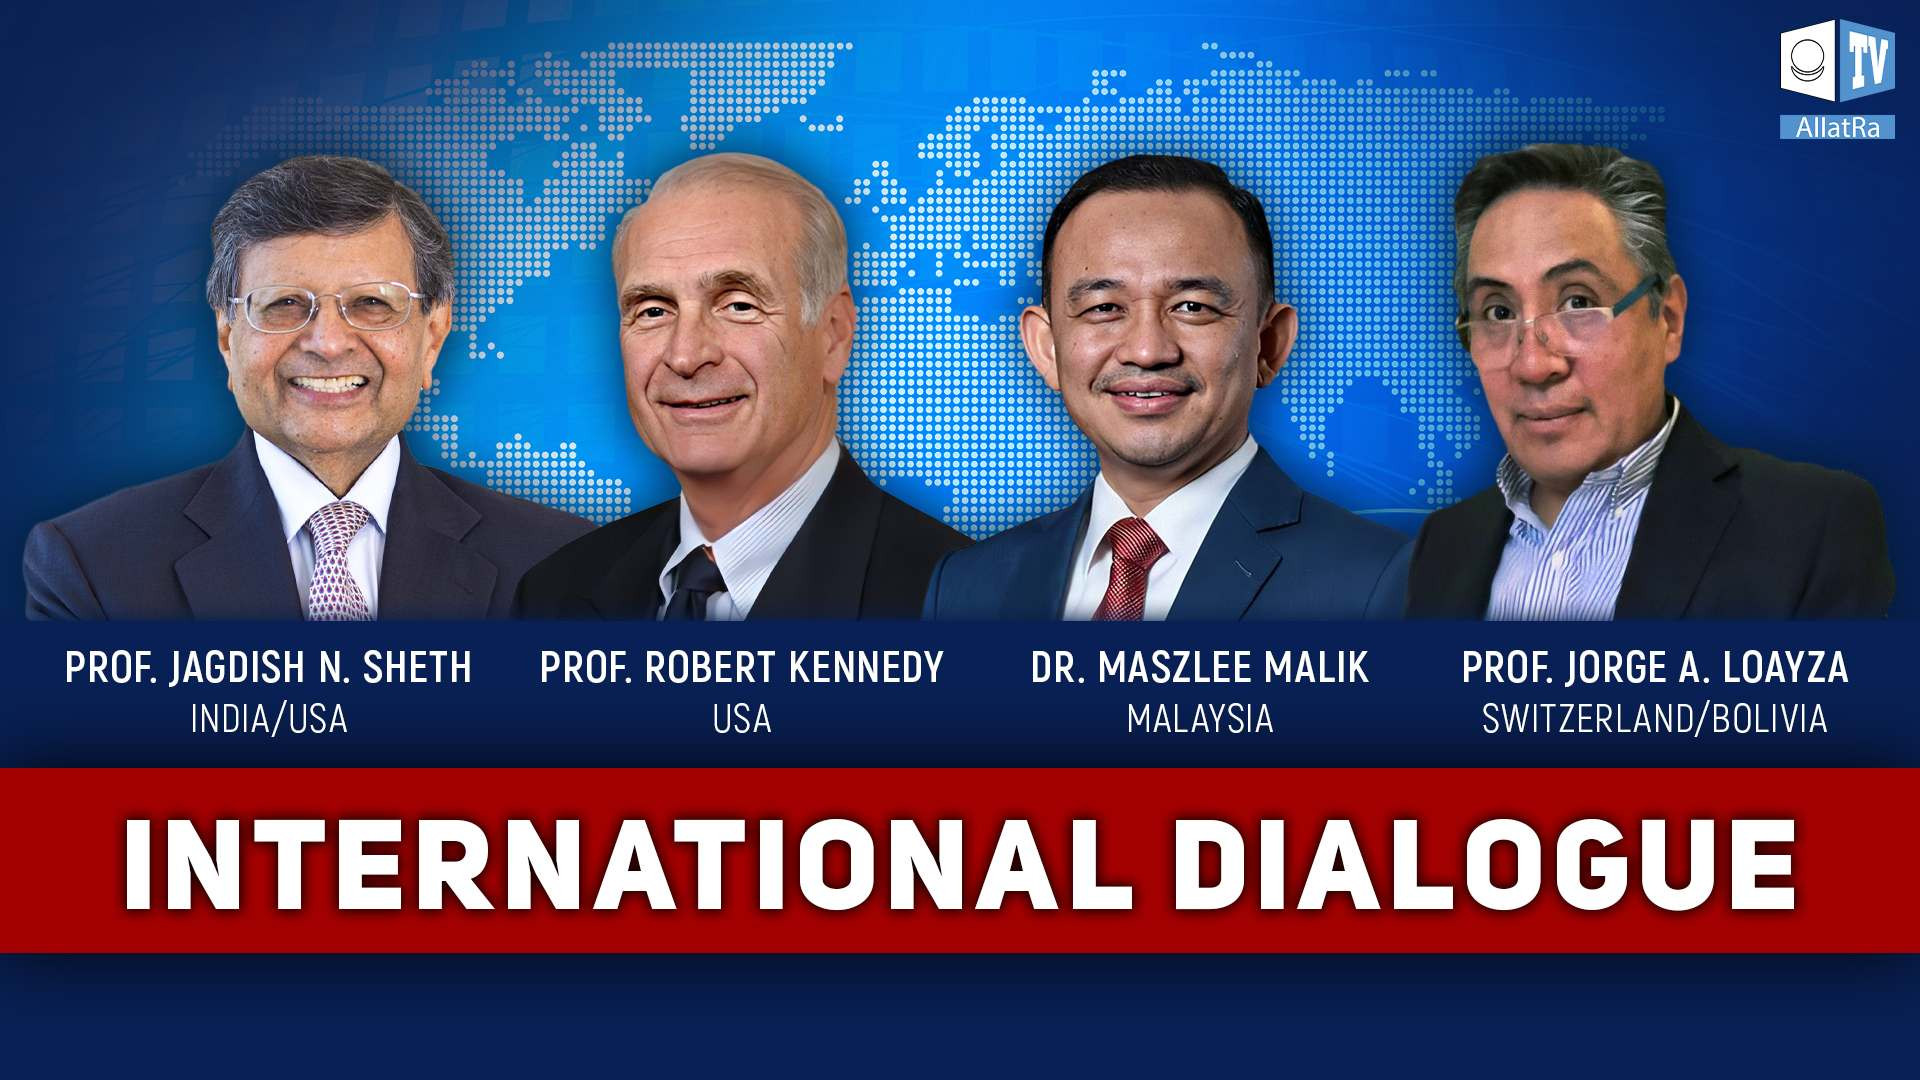 International Dialogue: the First Step to Overcoming Global Crisis